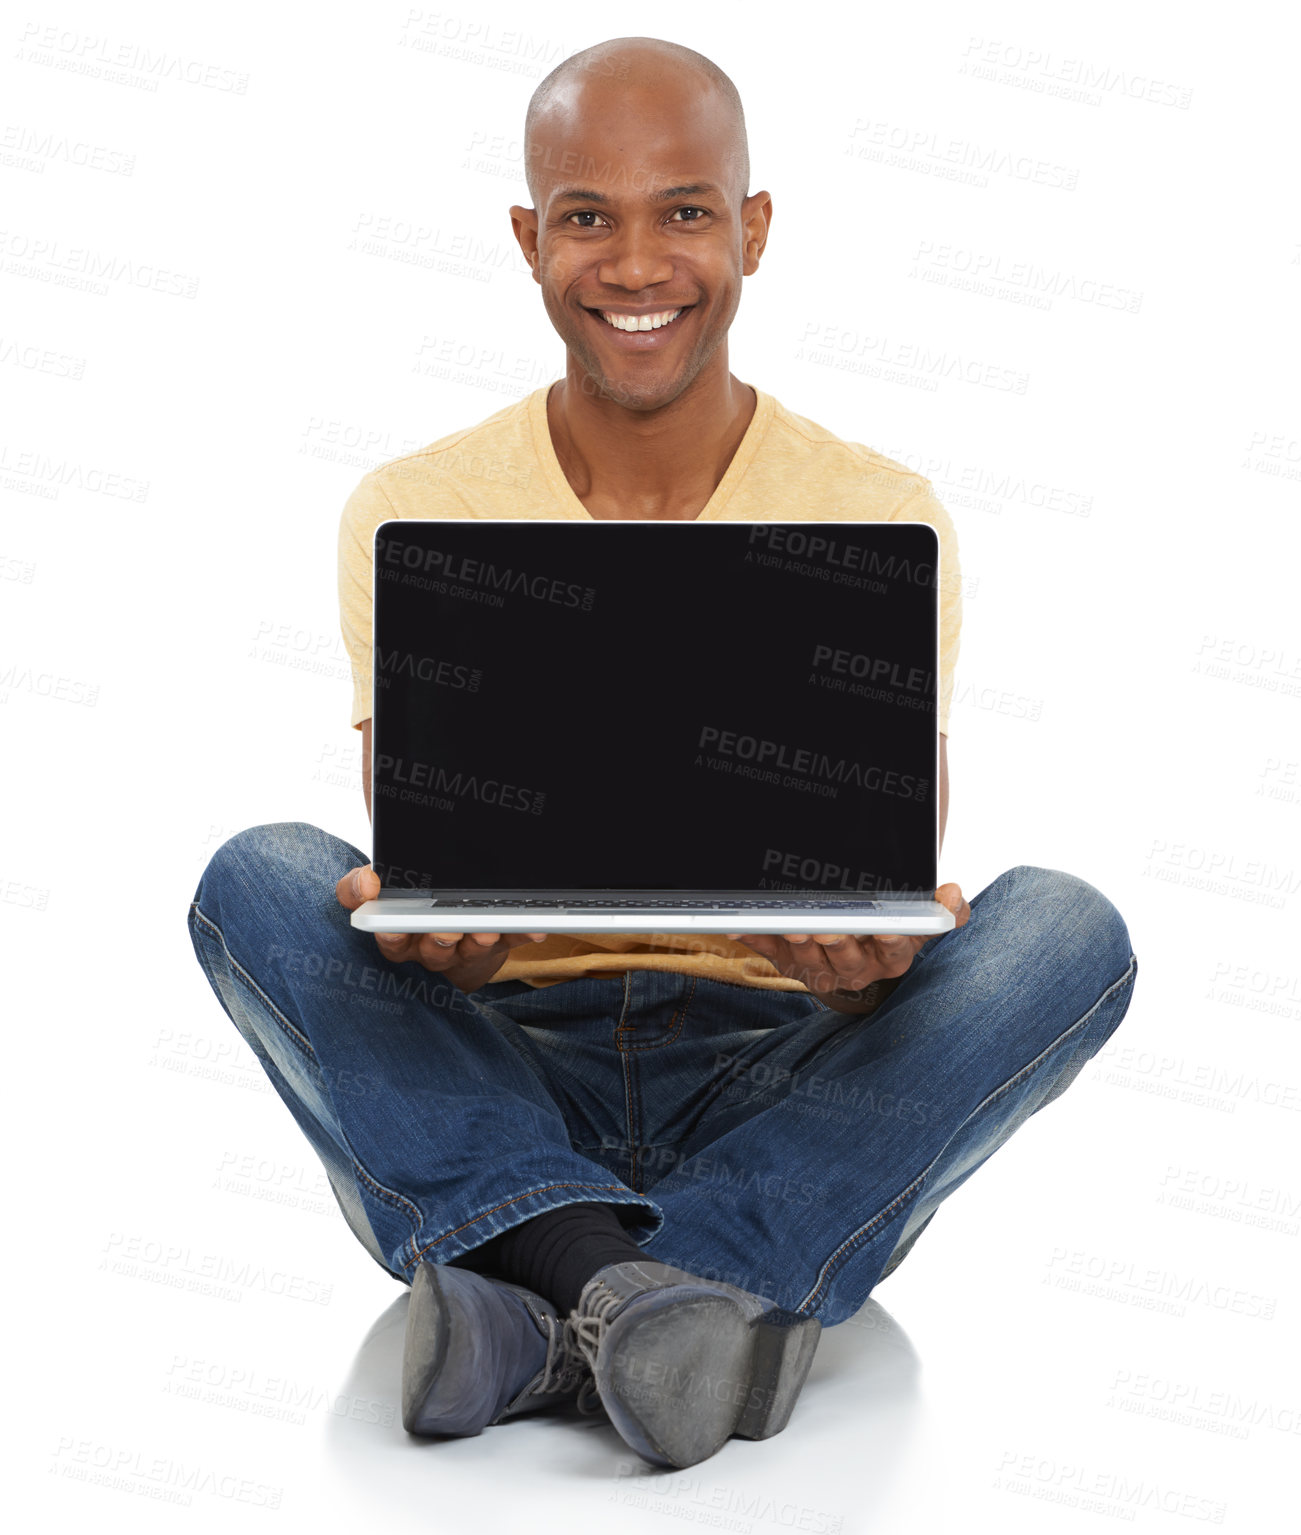 Buy stock photo Studio shot of a smiling African-American man sitting and holding a laptop out in front of him